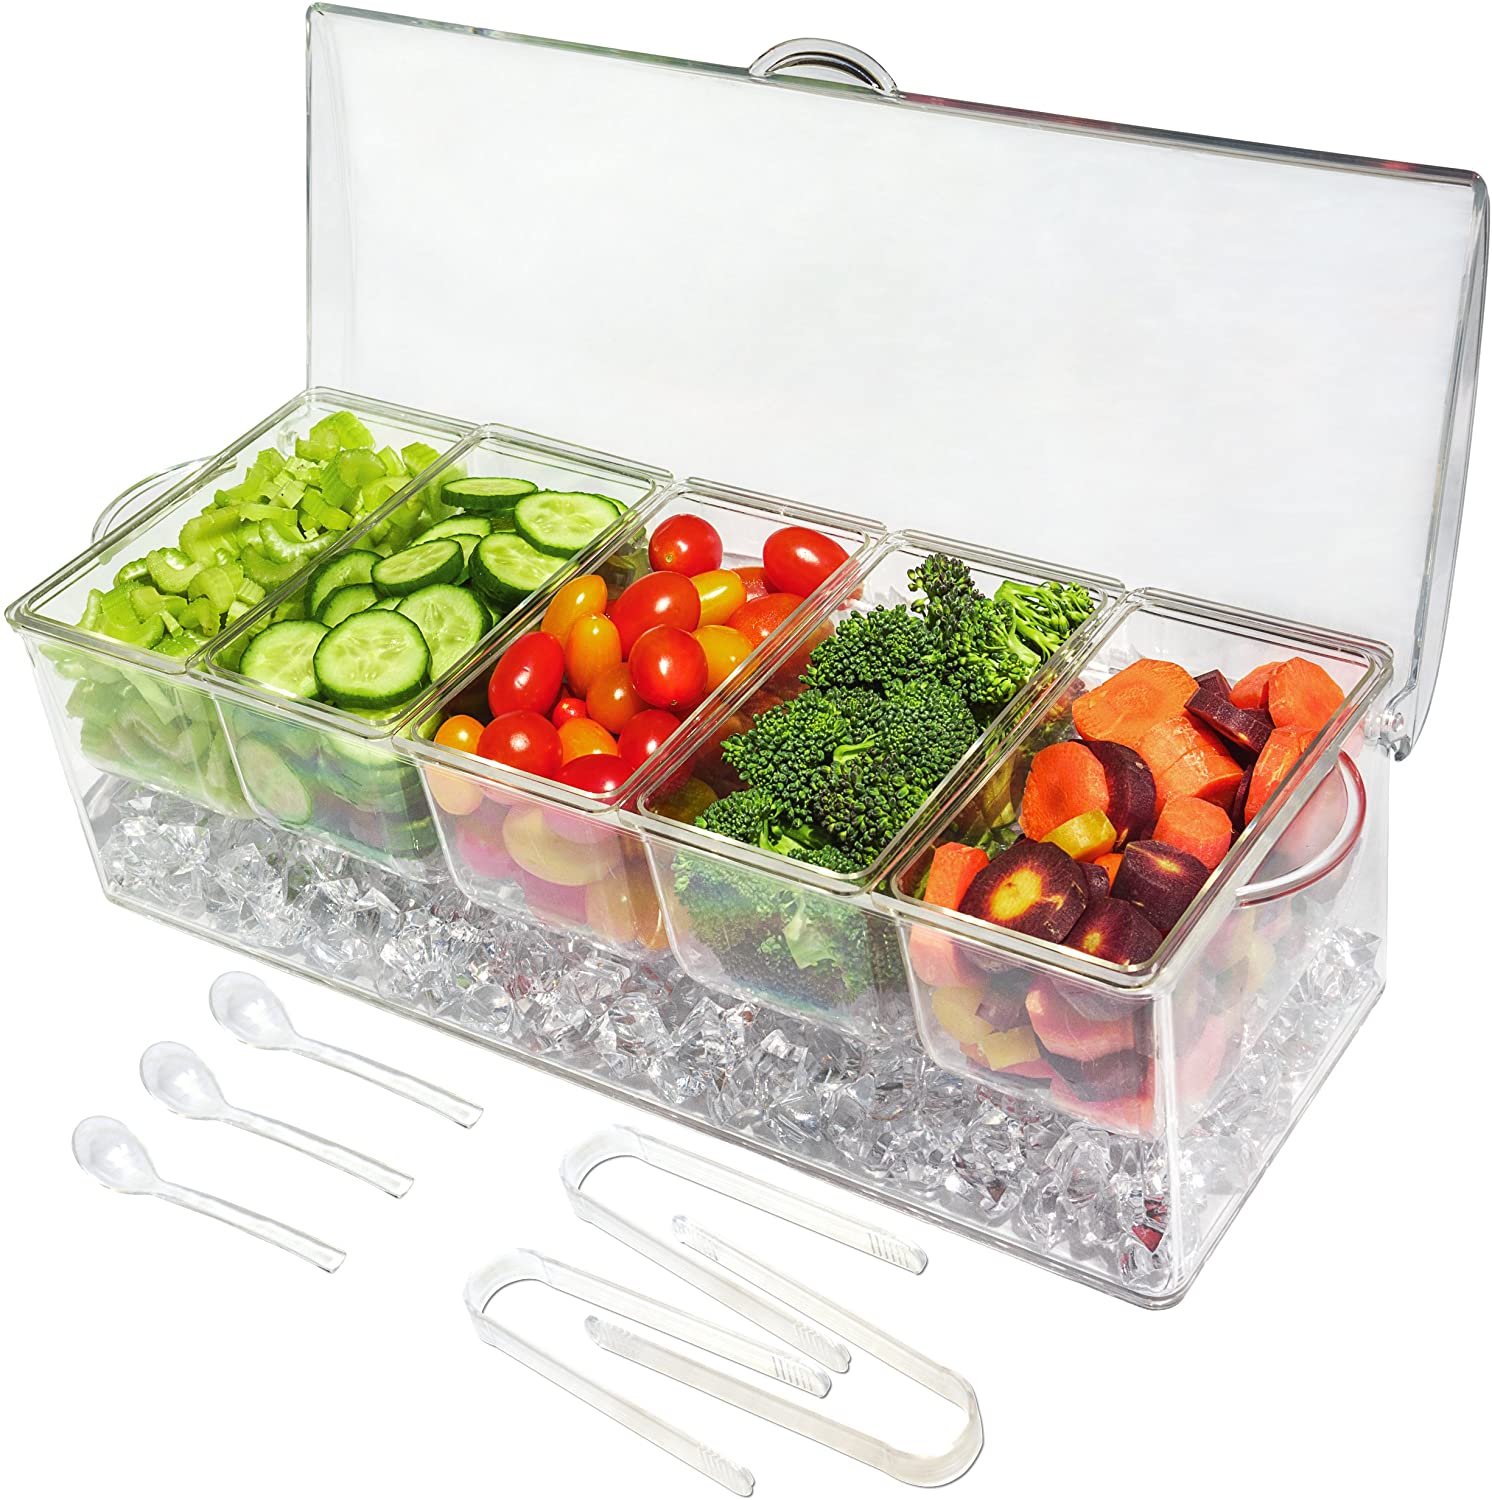 Impirilux Ice Chilled 5 Compartment Condiment Server Caddy